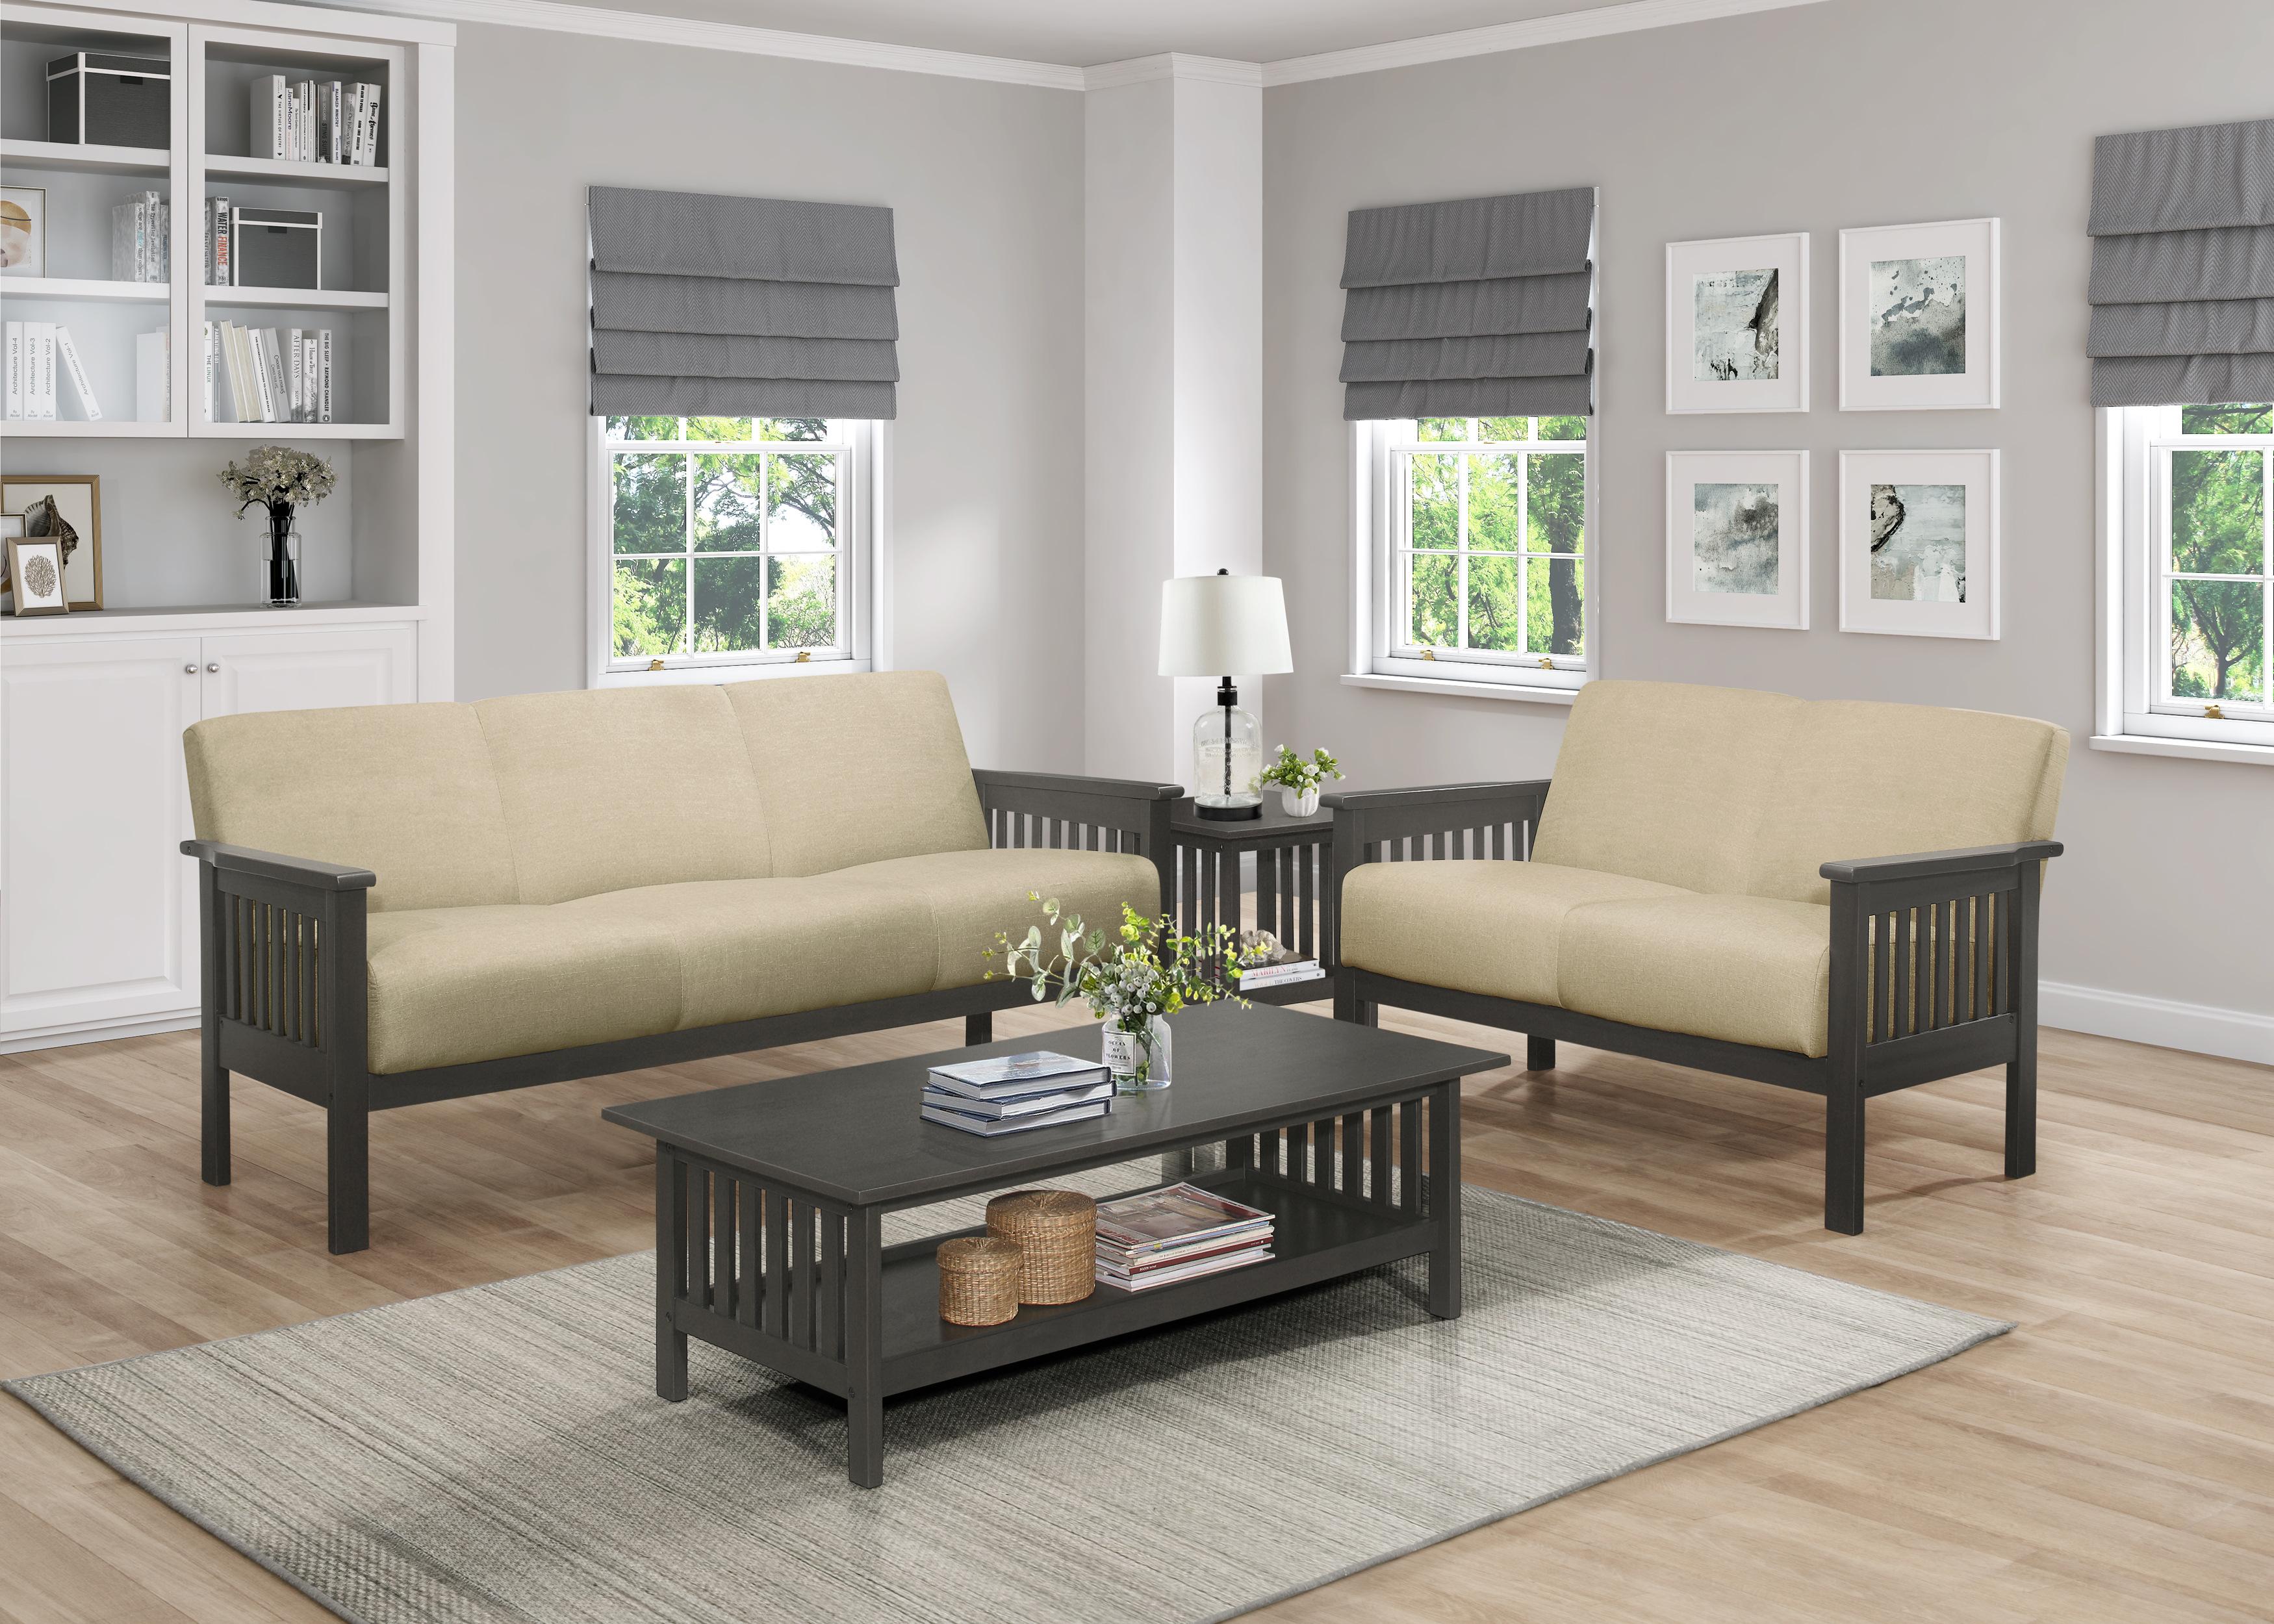 Classic Living Room Set 1104BR-2PC Lewiston 1104BR-2PC in Light Brown 